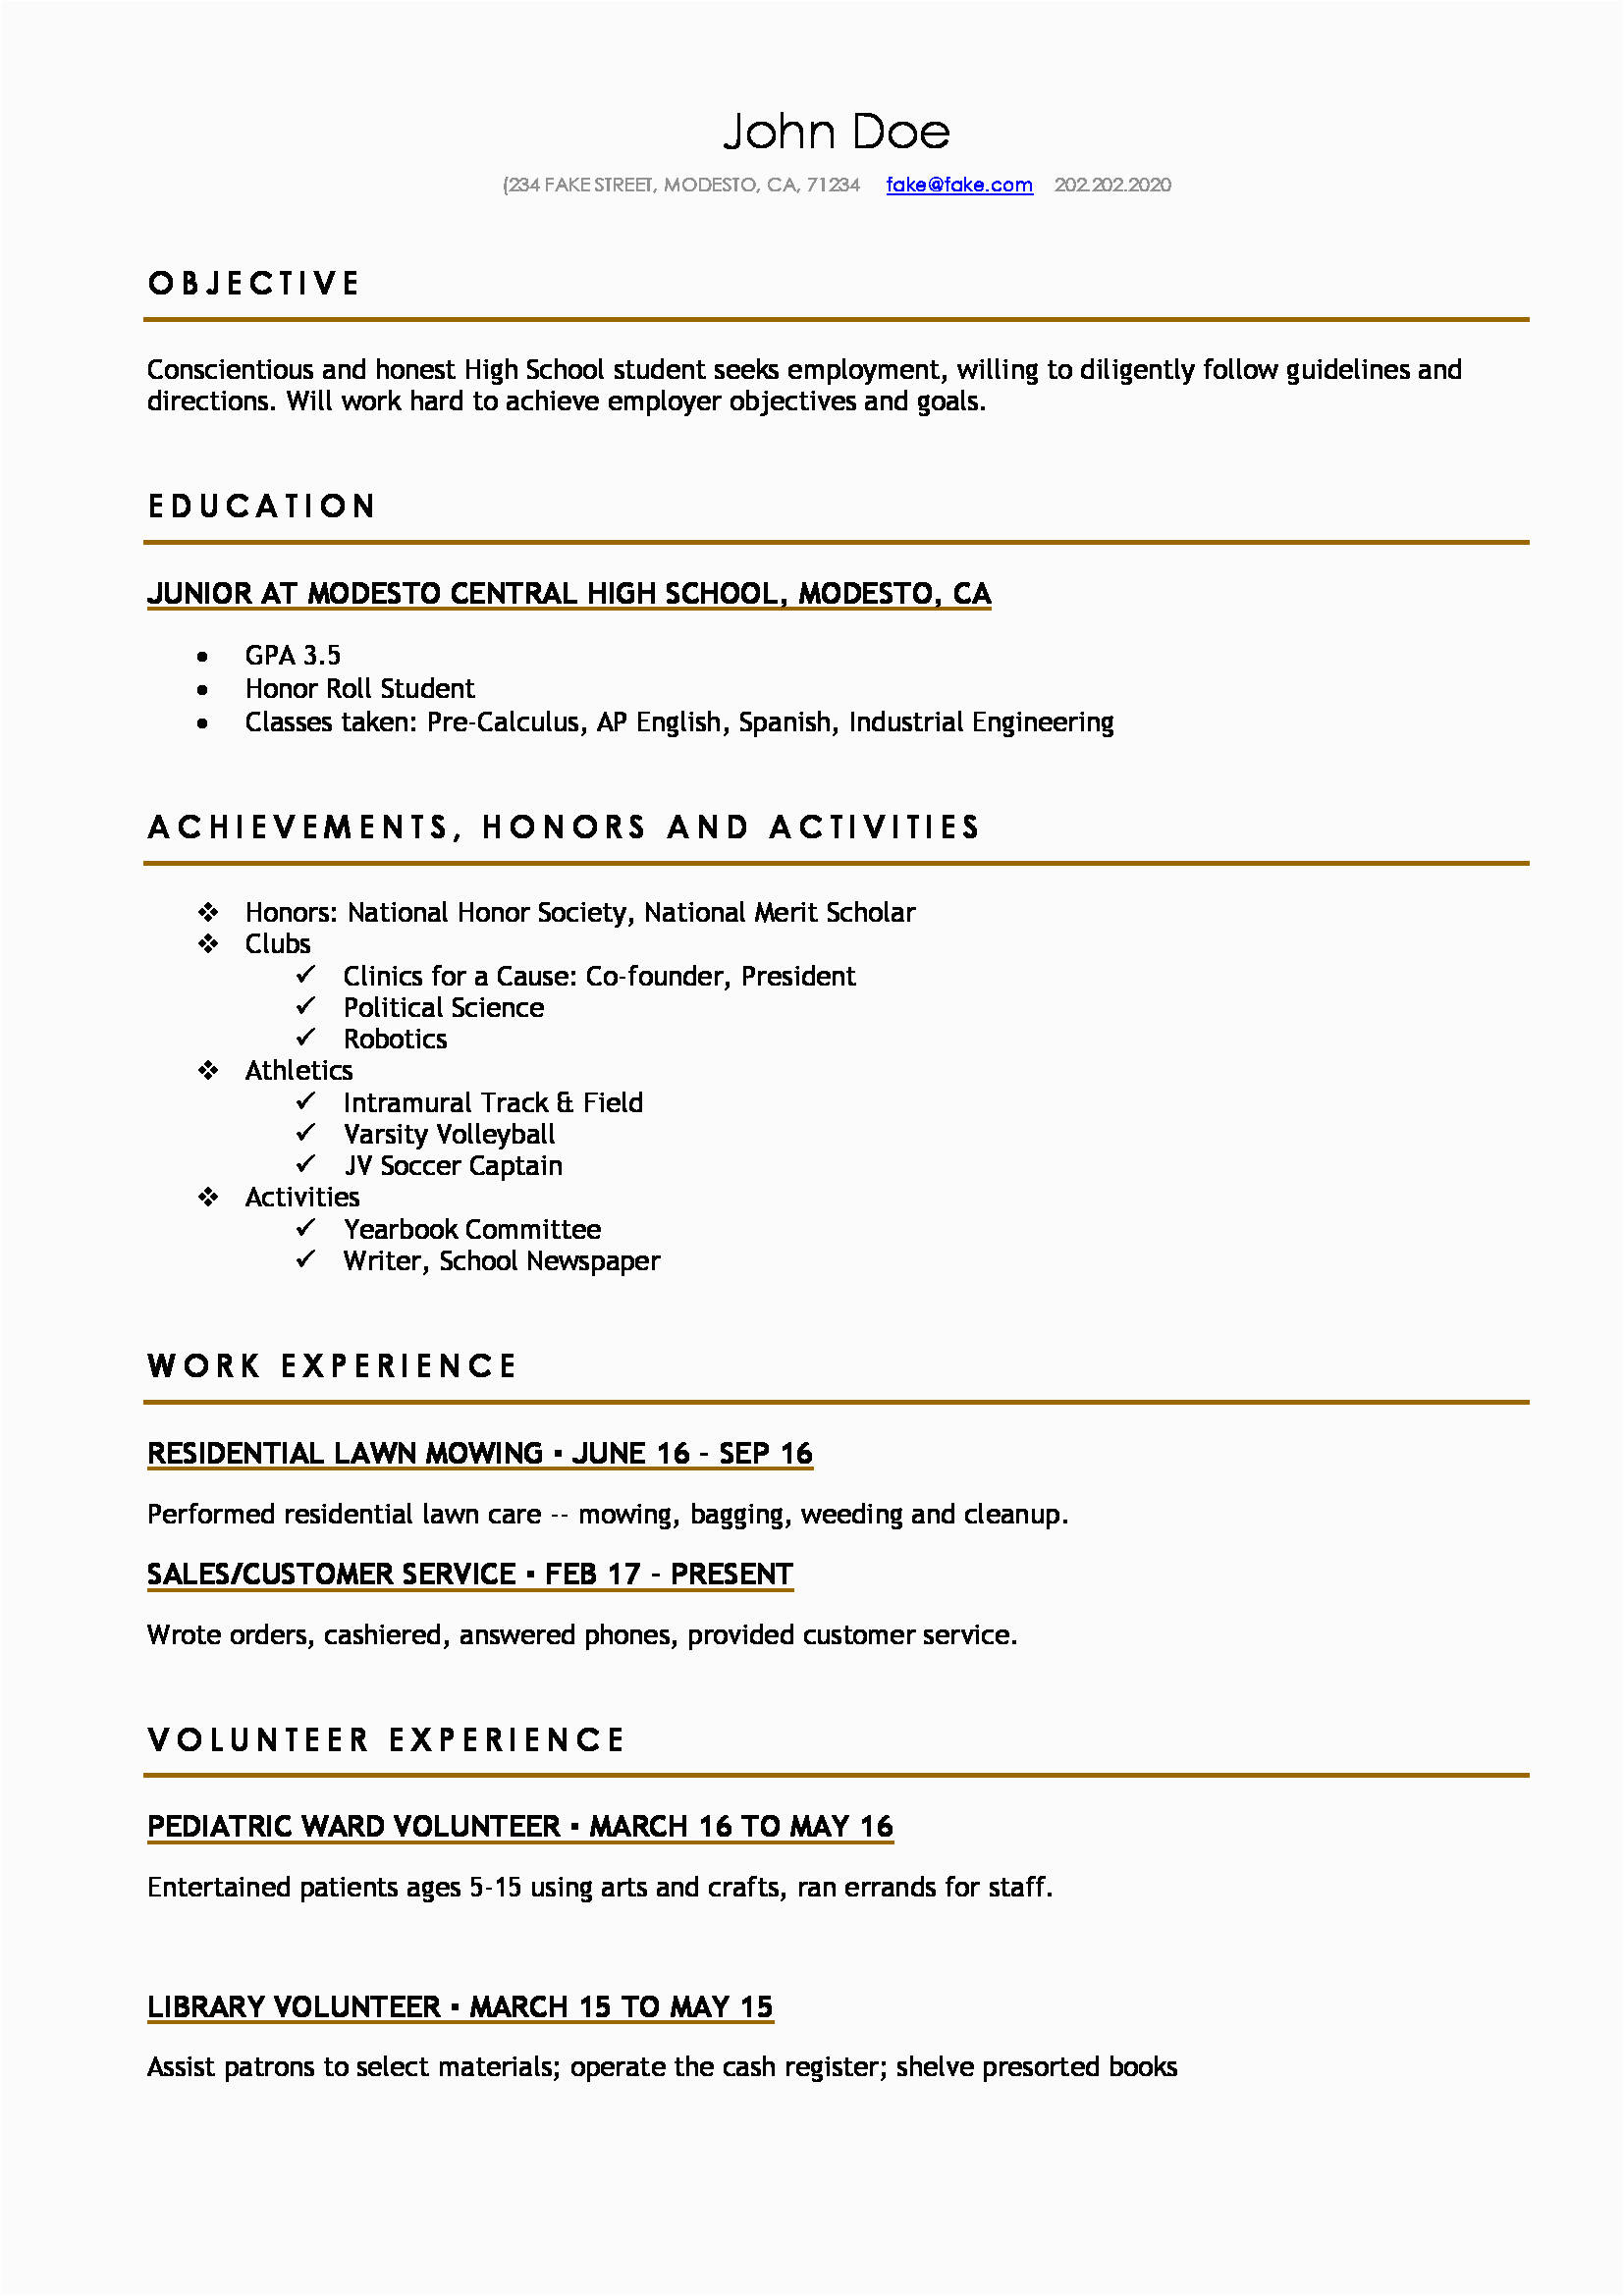 High School Student First Resume Template High School Resume Resume Templates for High School